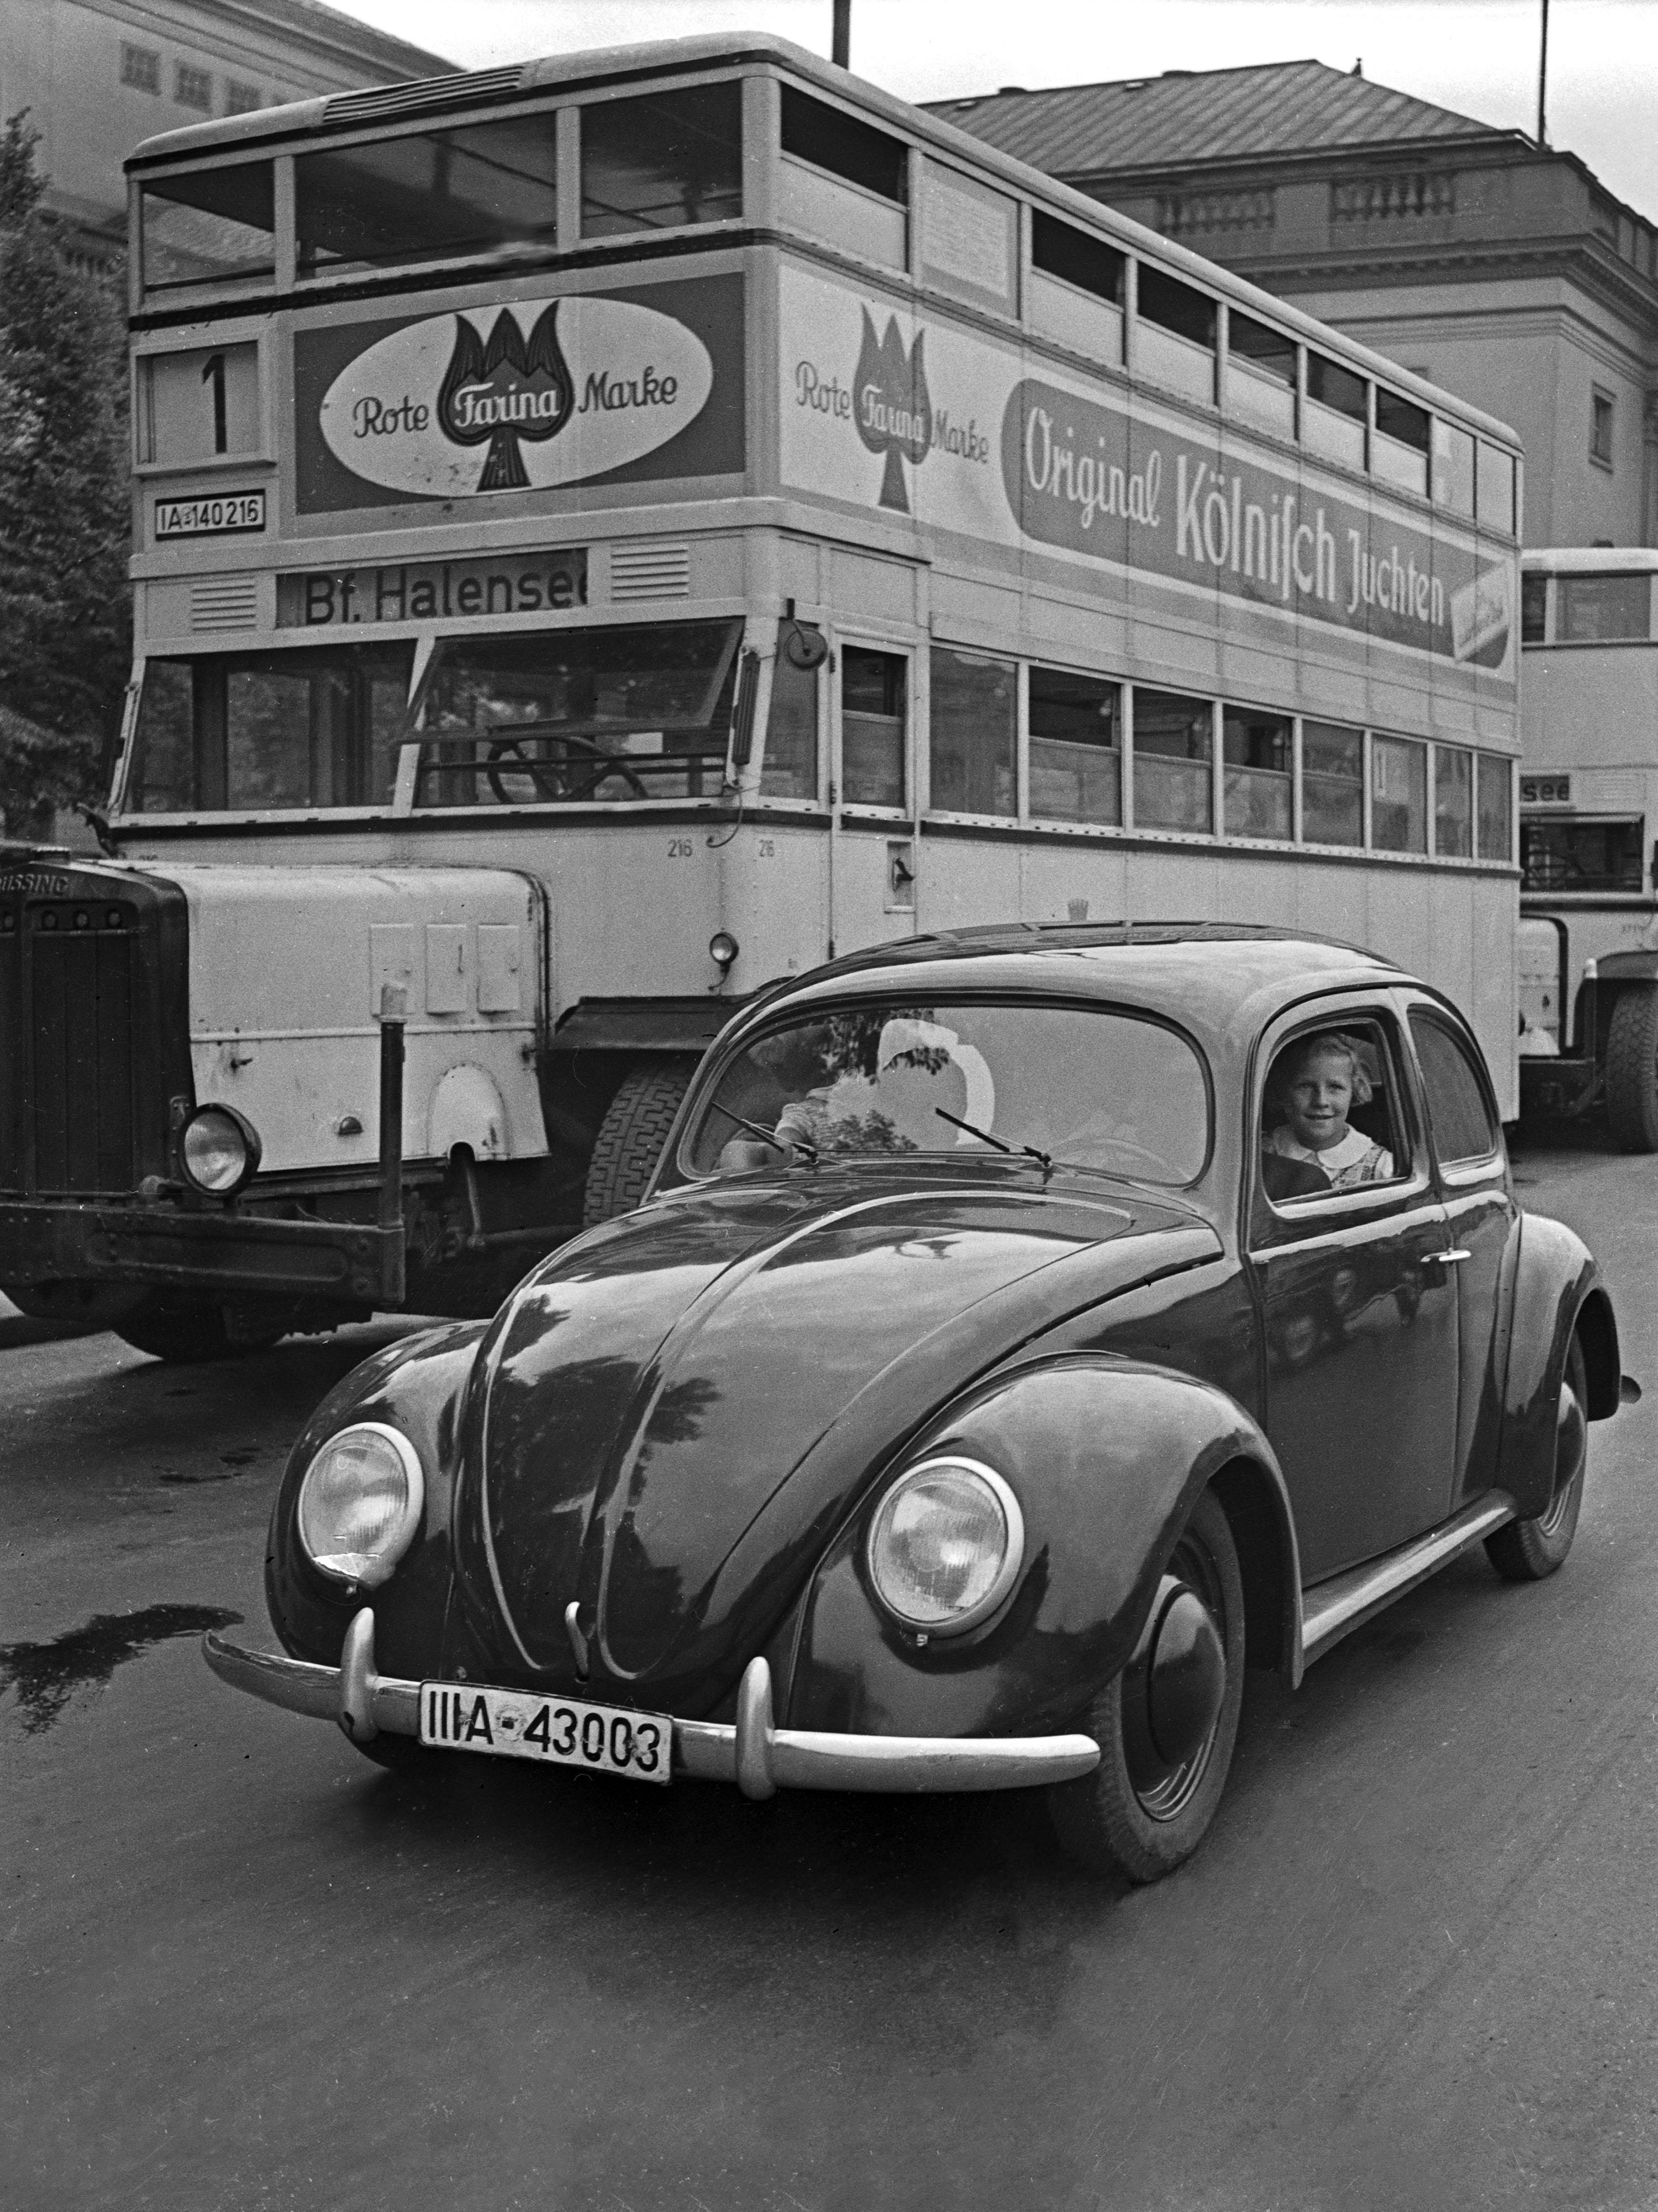 Karl Heinrich Lämmel Black and White Photograph - Volkswagen Kaefer and Double Decker in Berlin, Germany 1939 Printed Later